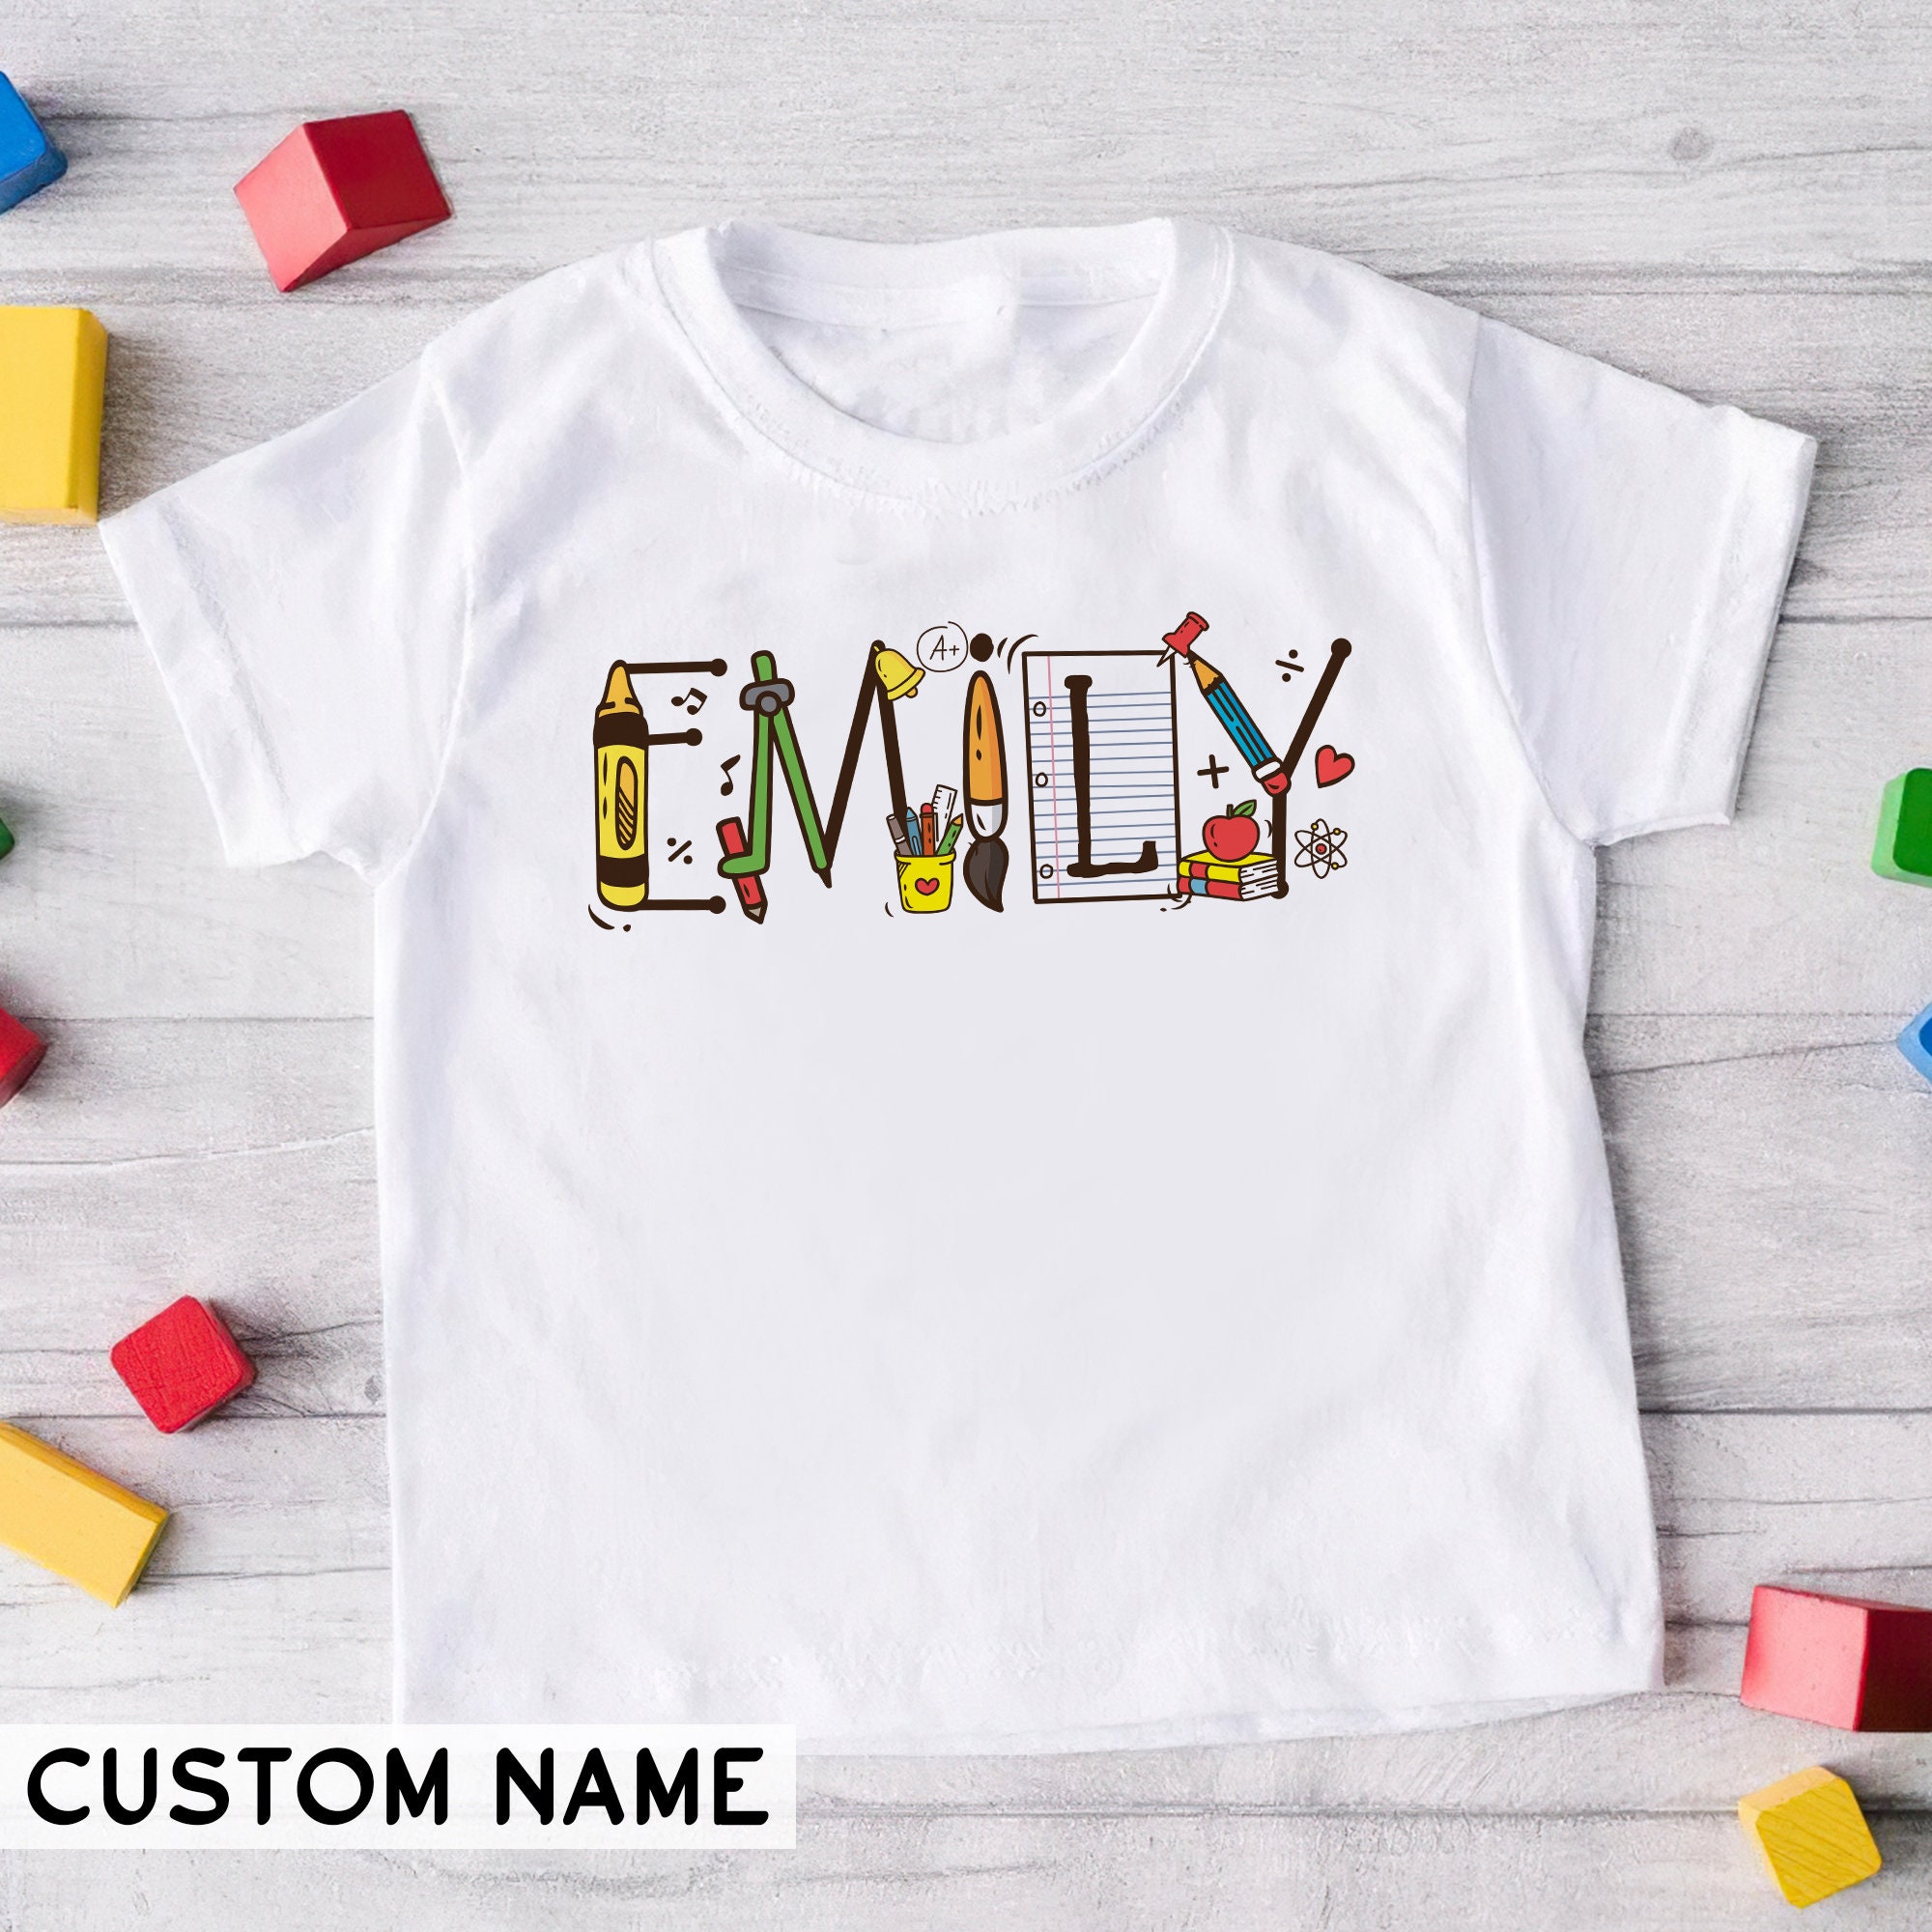 Kids Back to School Shirt, First Day of School Shirt, Personalized Kids Name Shirt